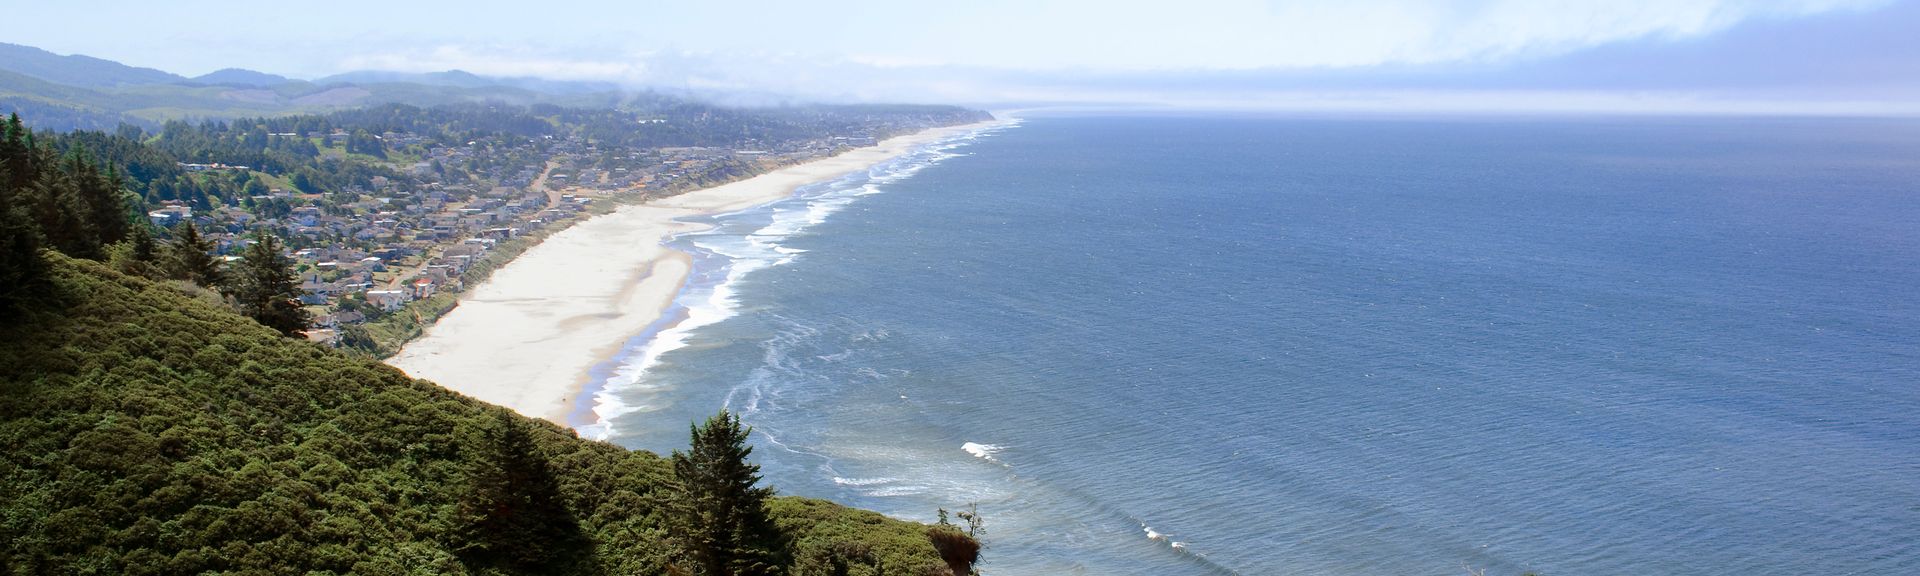 Lincoln City, OR vacation rentals: Houses & more | HomeAway